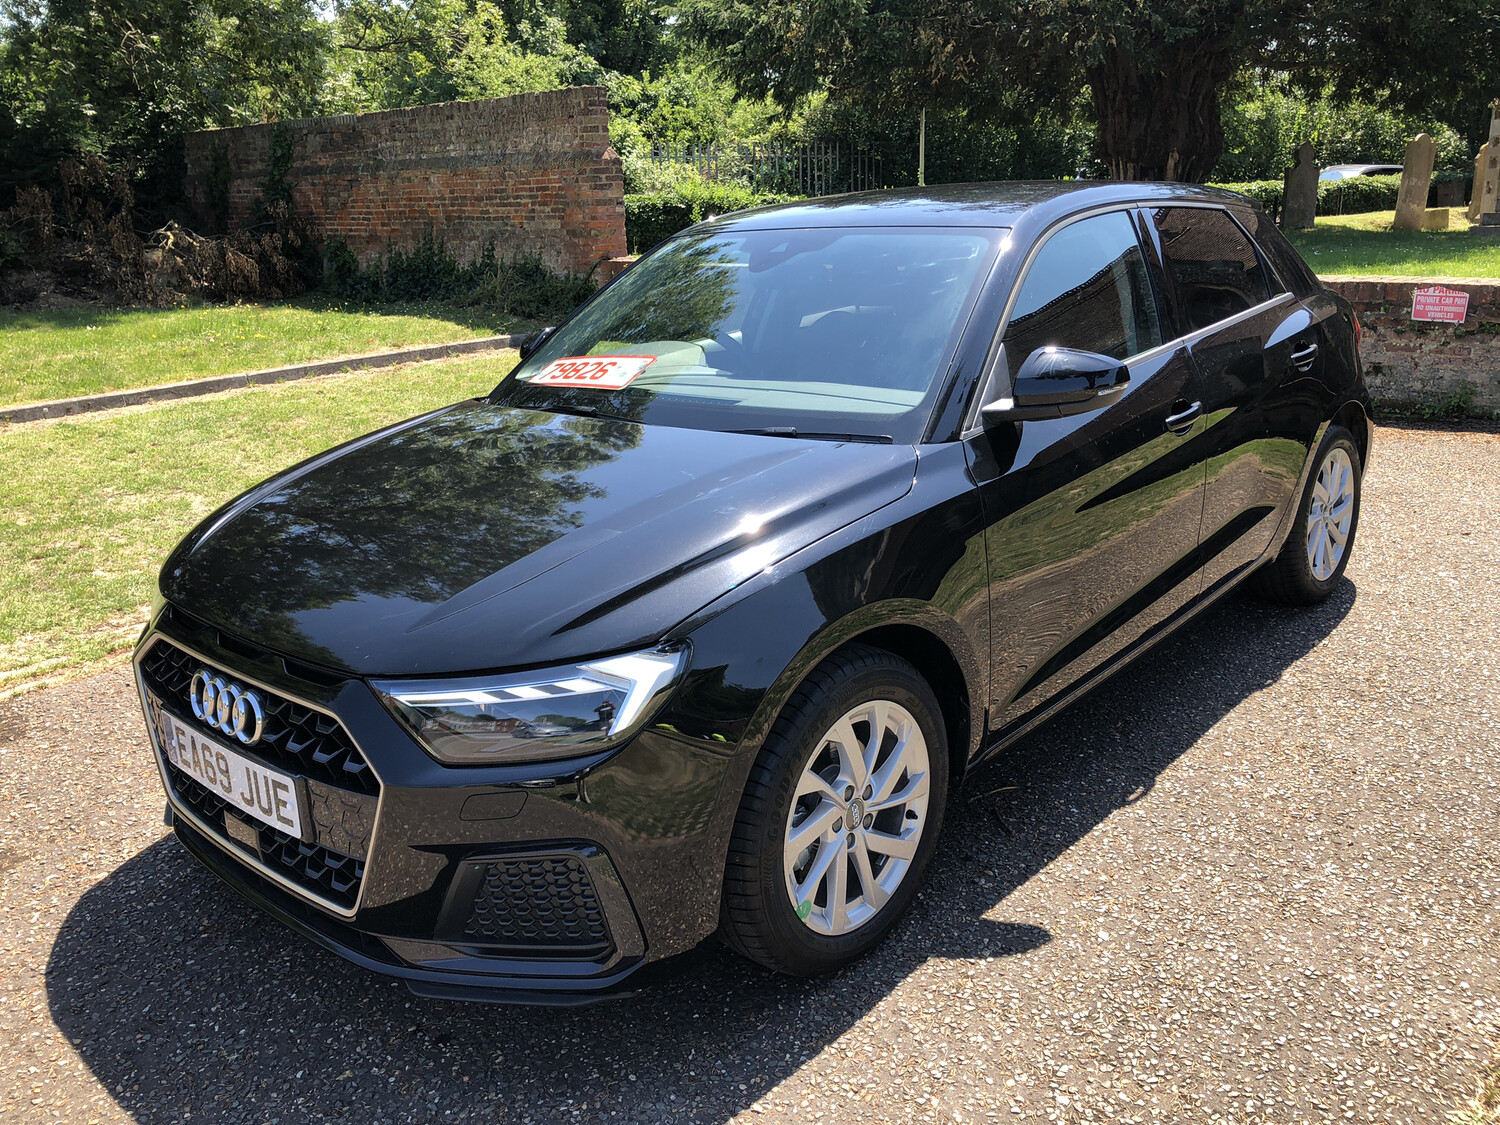 AUDI NEW A1 5 DR AUTO 1.5 PETROL ONLY 251 MILES !!